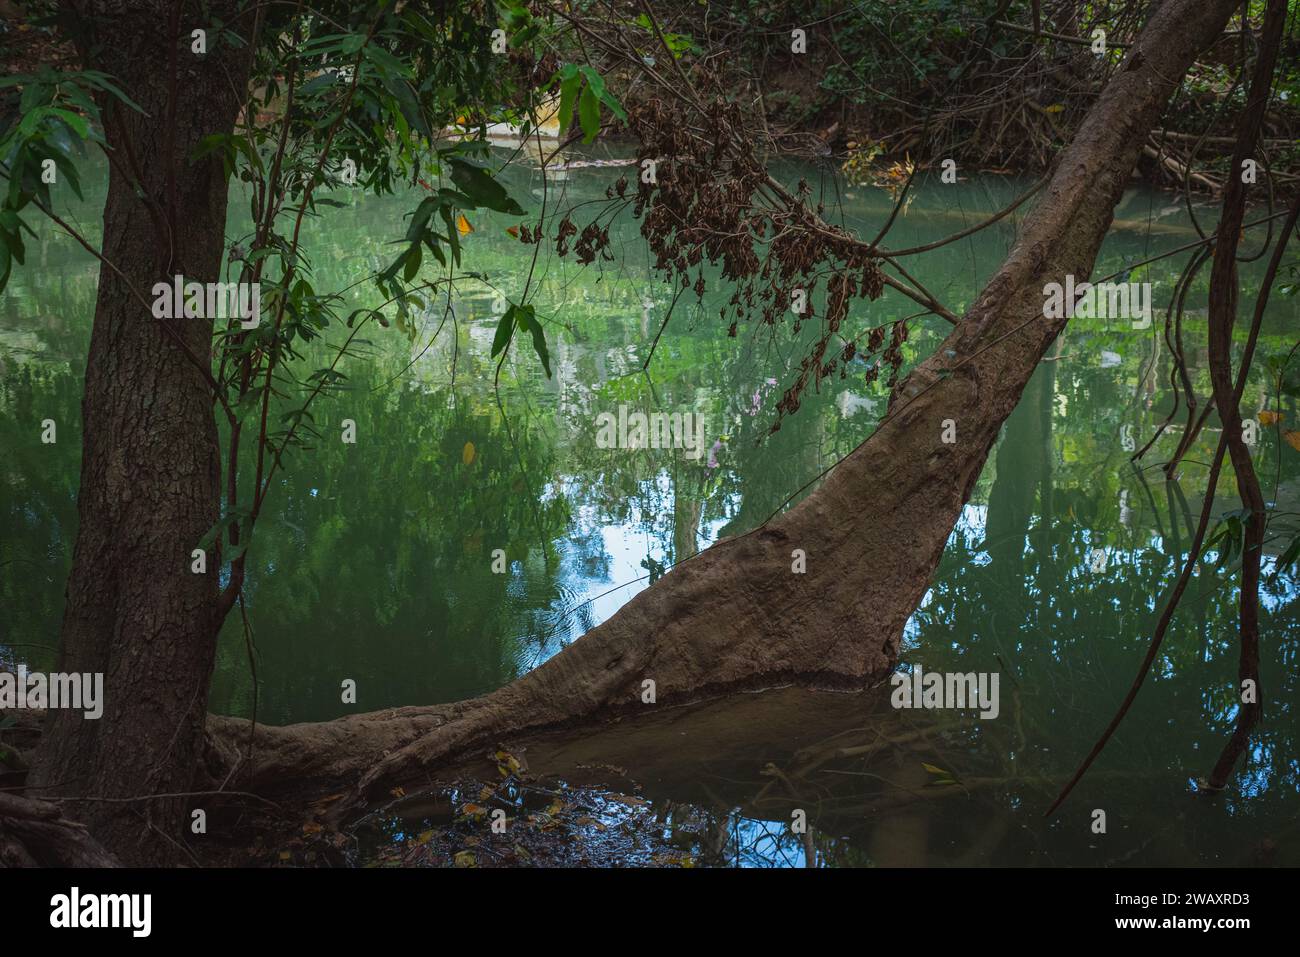 Banyan tree growing from green river backwater. Muak Lek River in Chet Sao Noi National Park, Thailand. Stock Photo